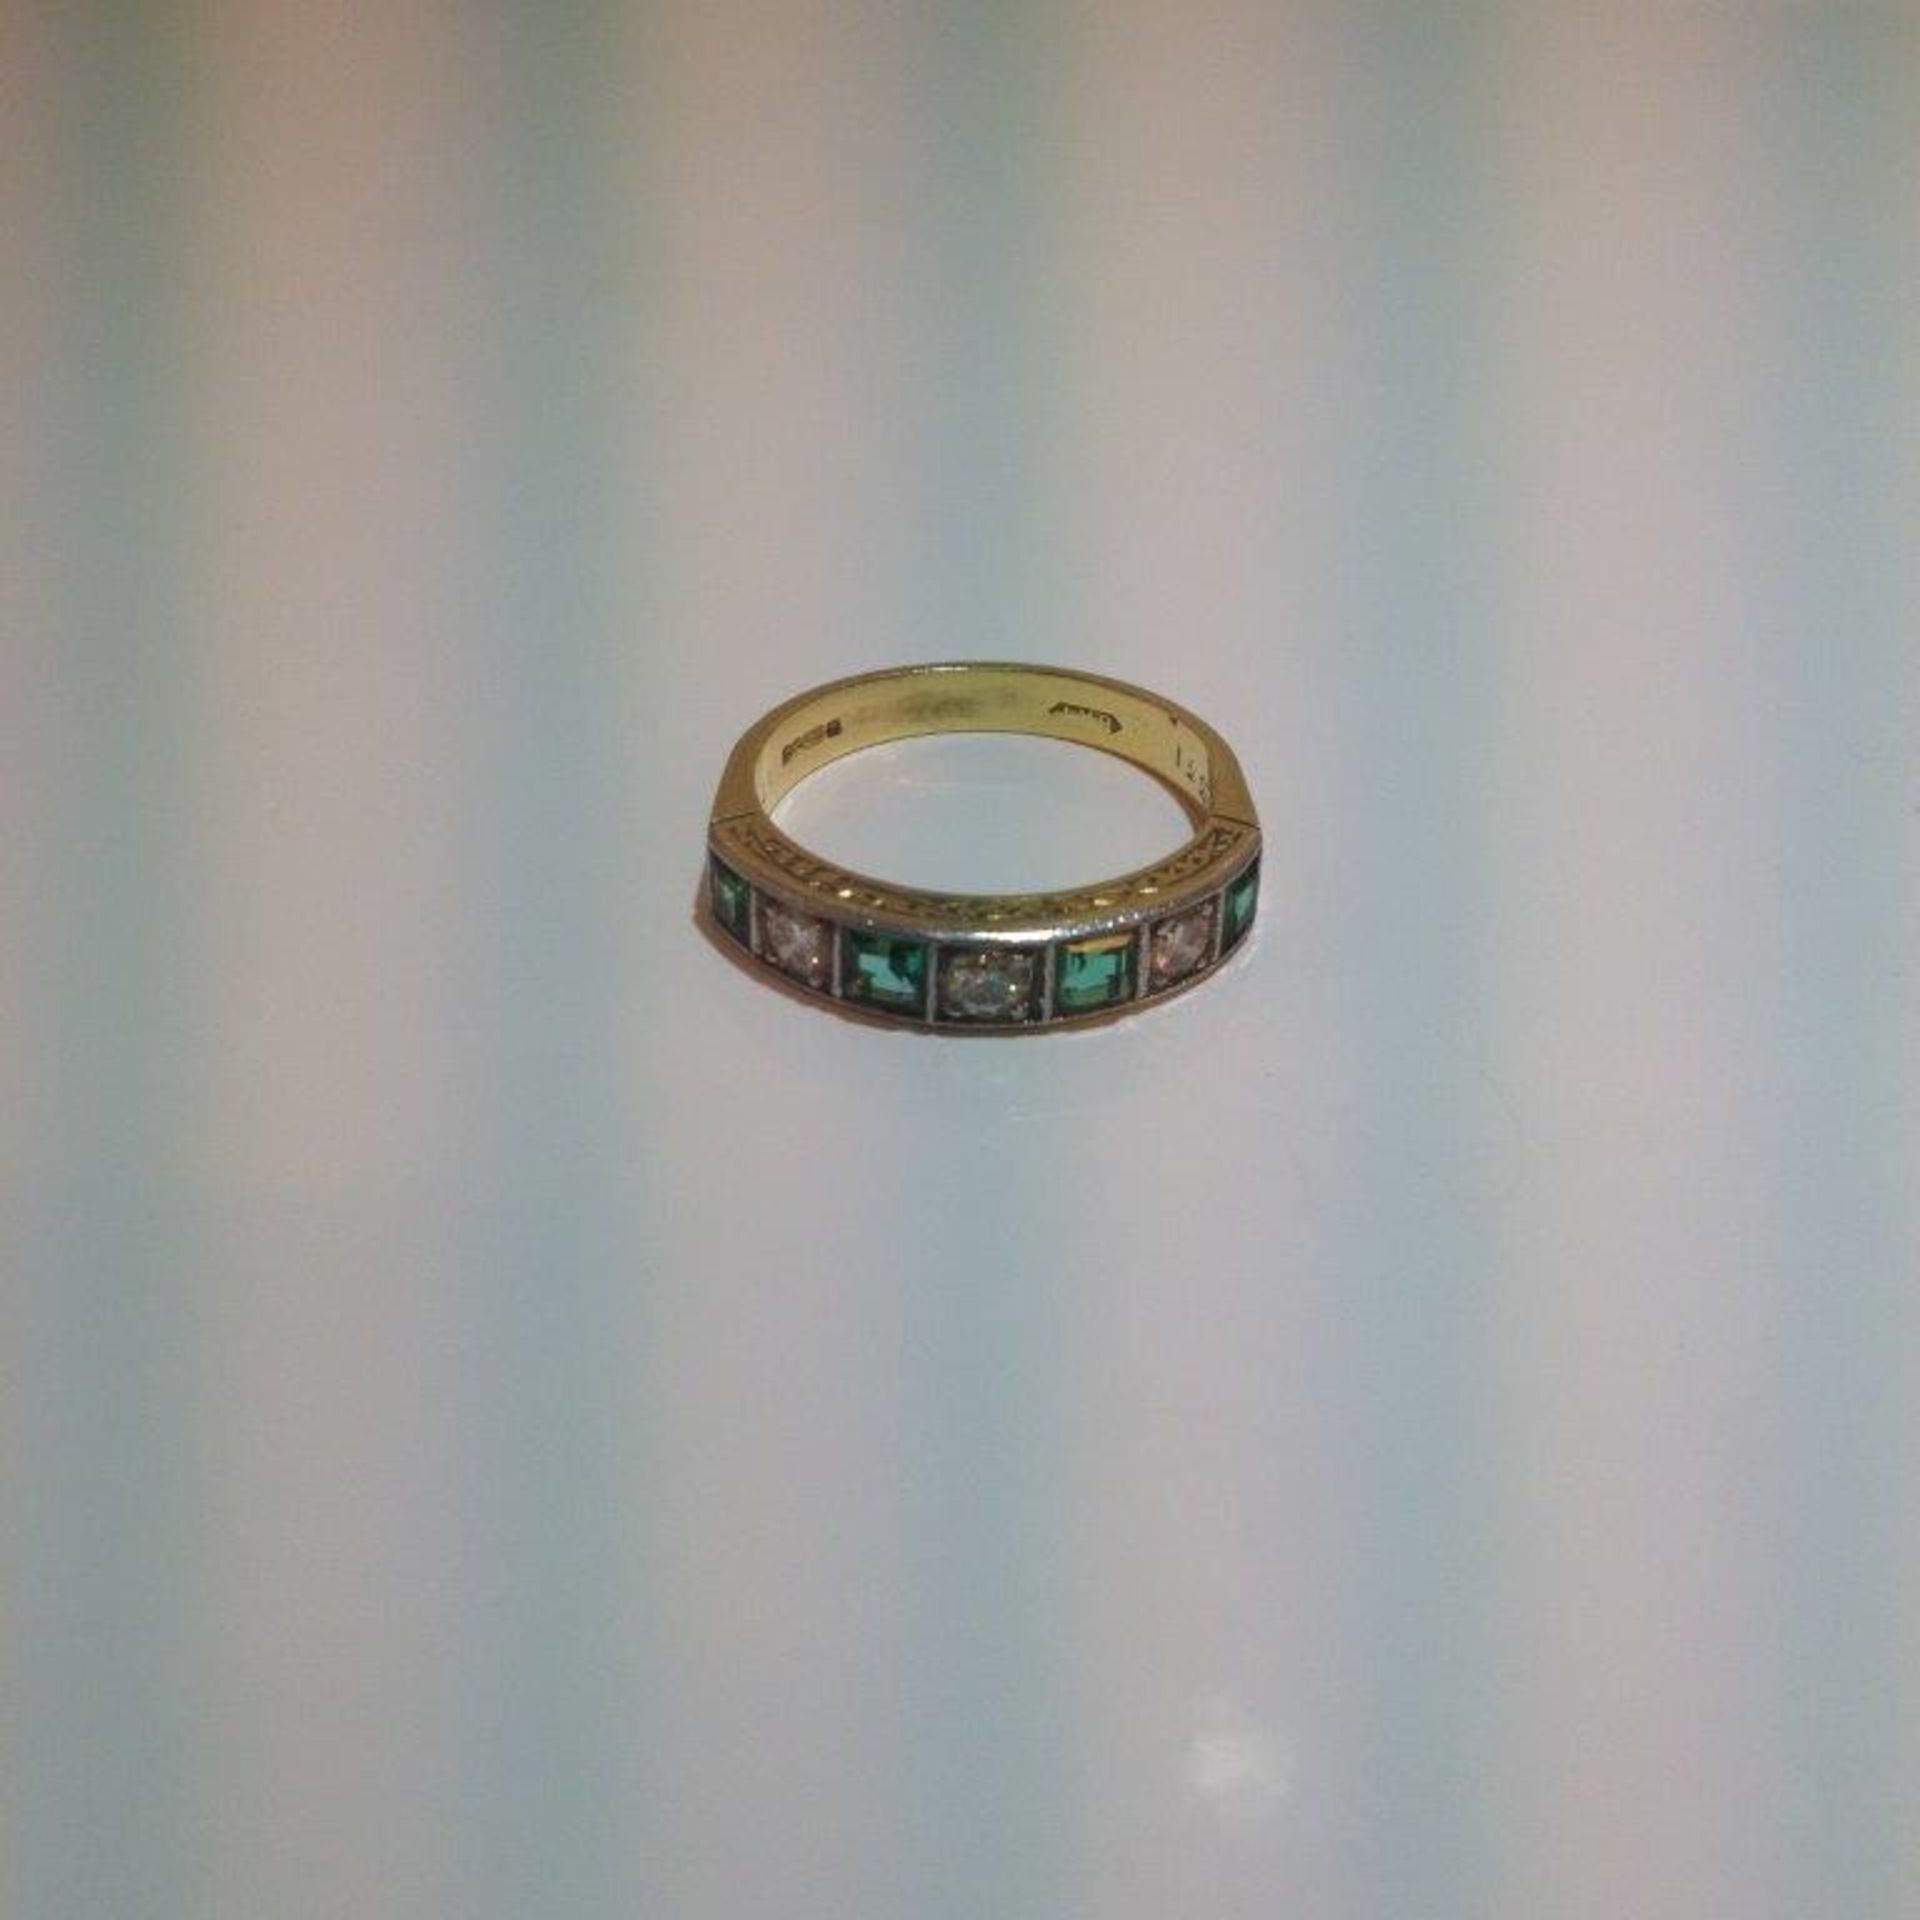 Pre owned 18ct yellow gold Diamond and Emerald 7 stone Eternity Ring - Image 3 of 4